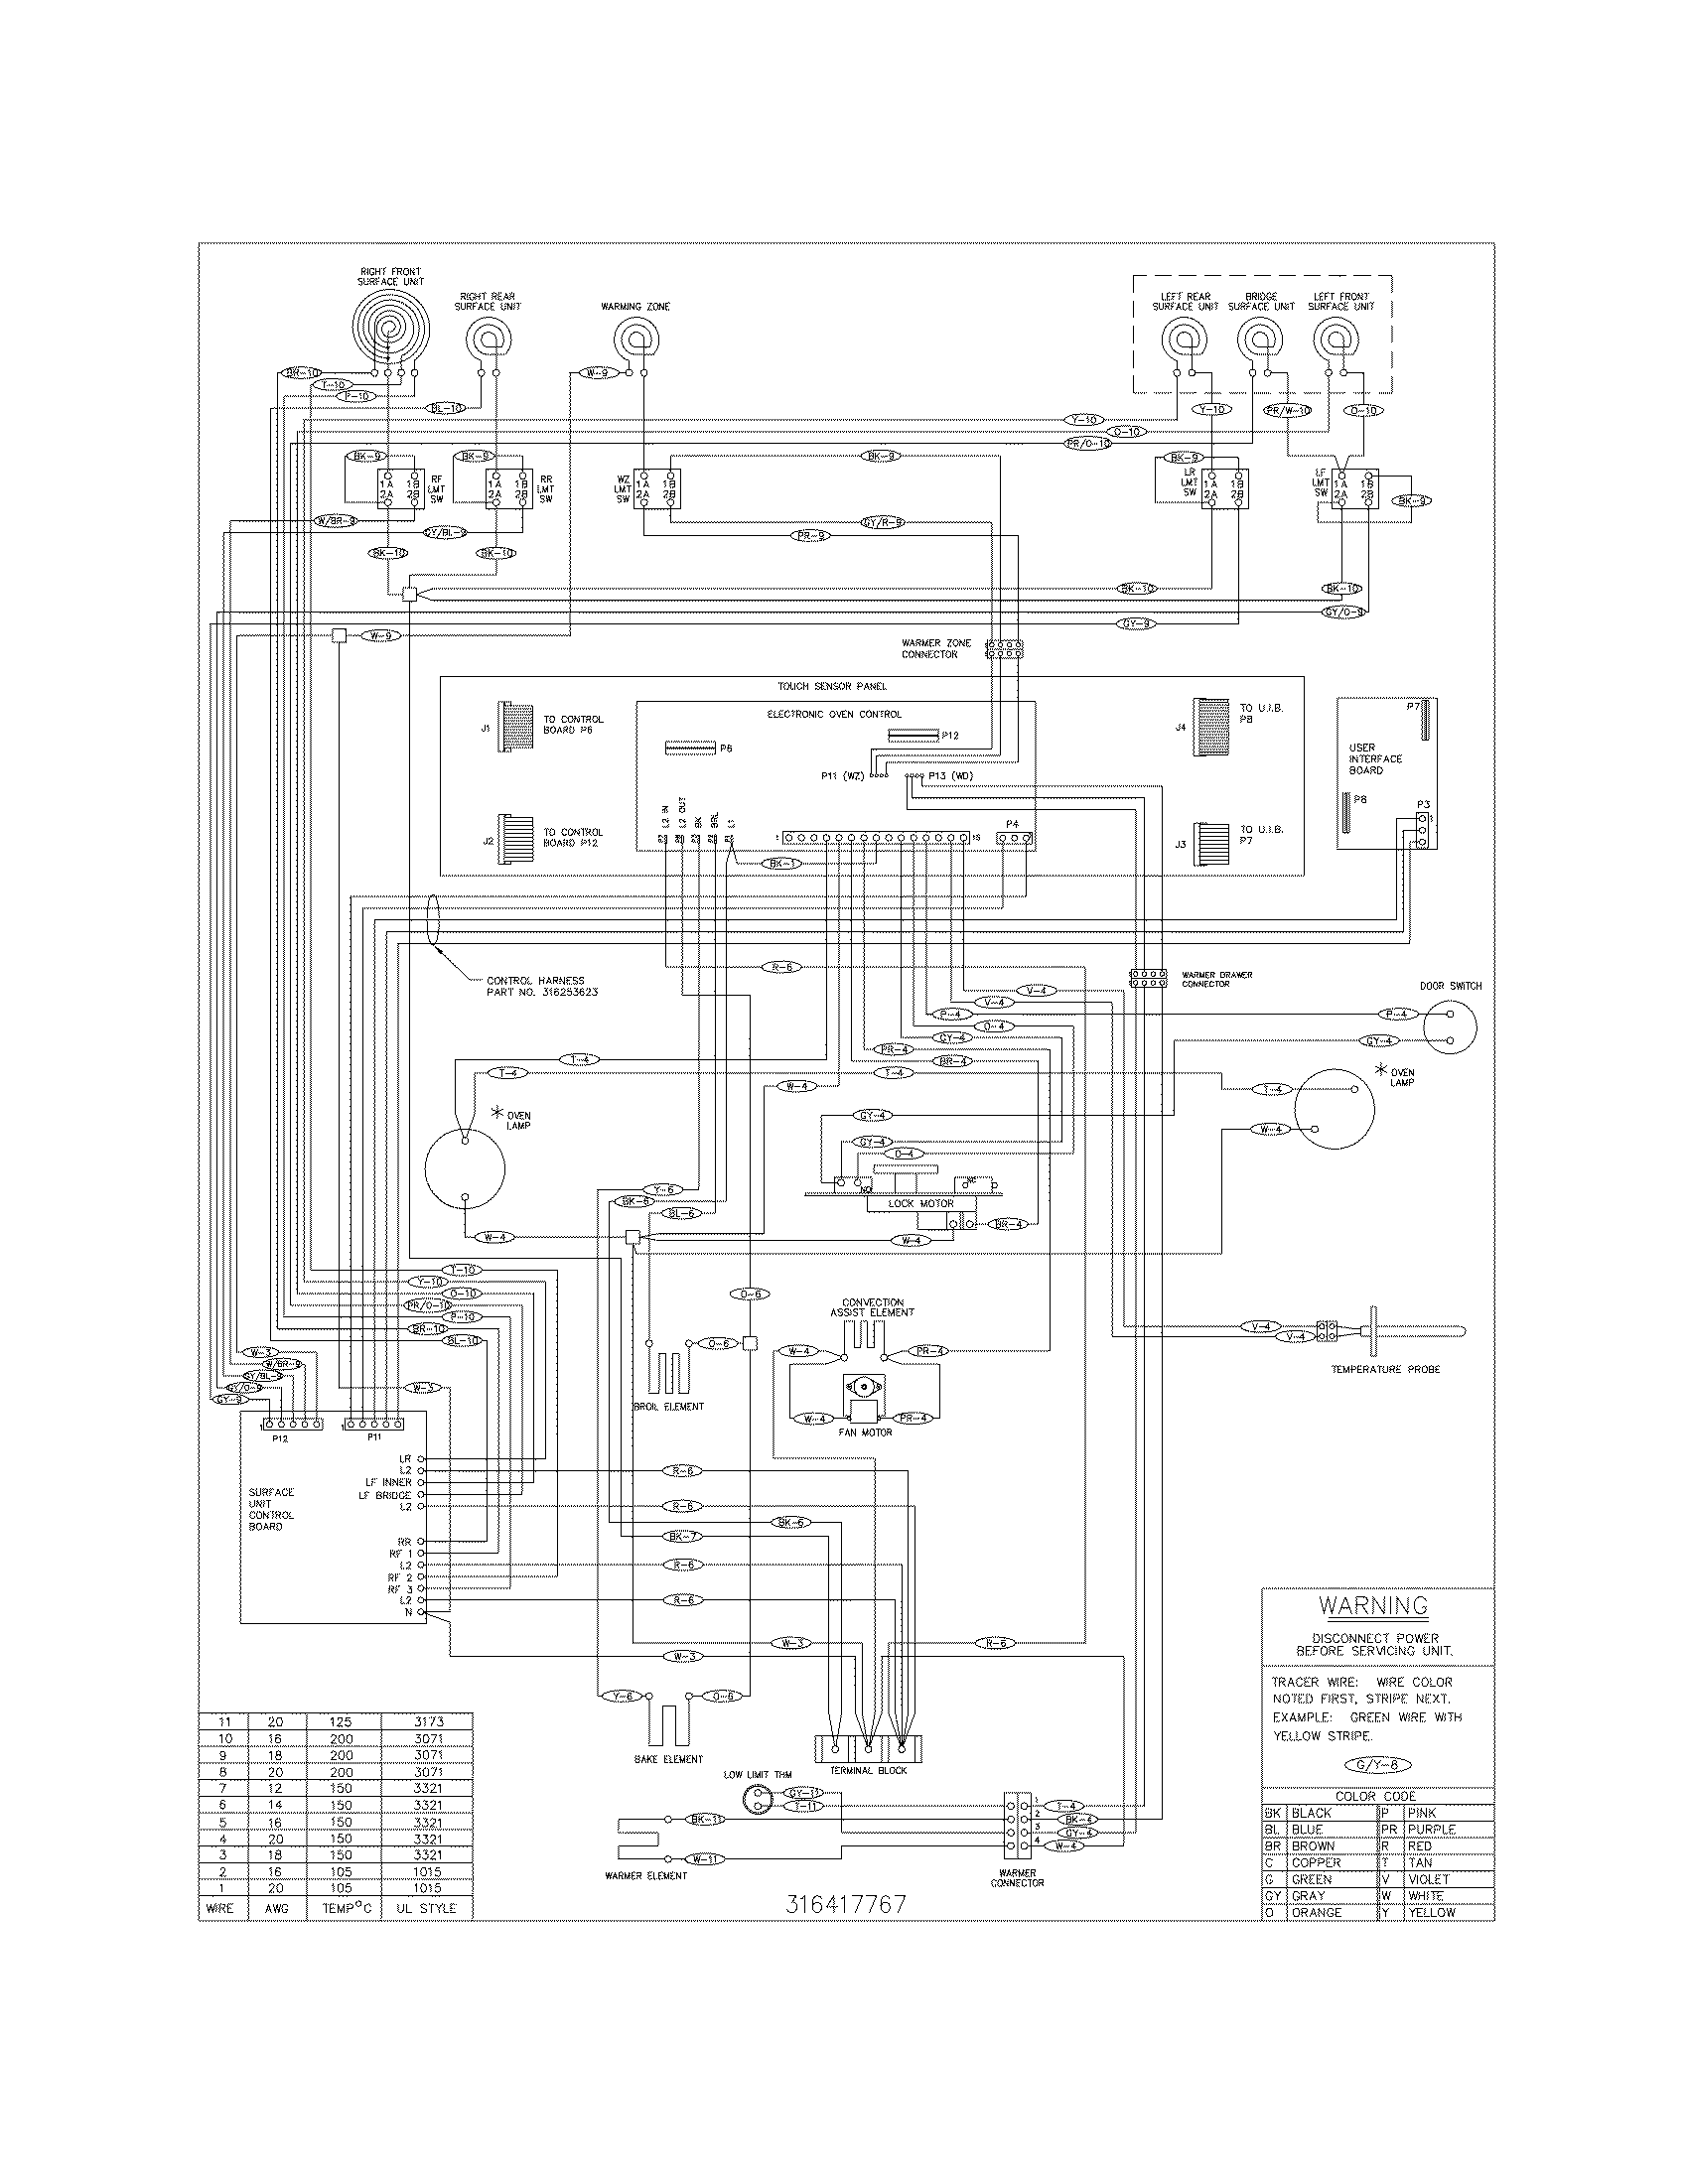 Kenmore Elite Dryer Wiring Diagram from c.searspartsdirect.com